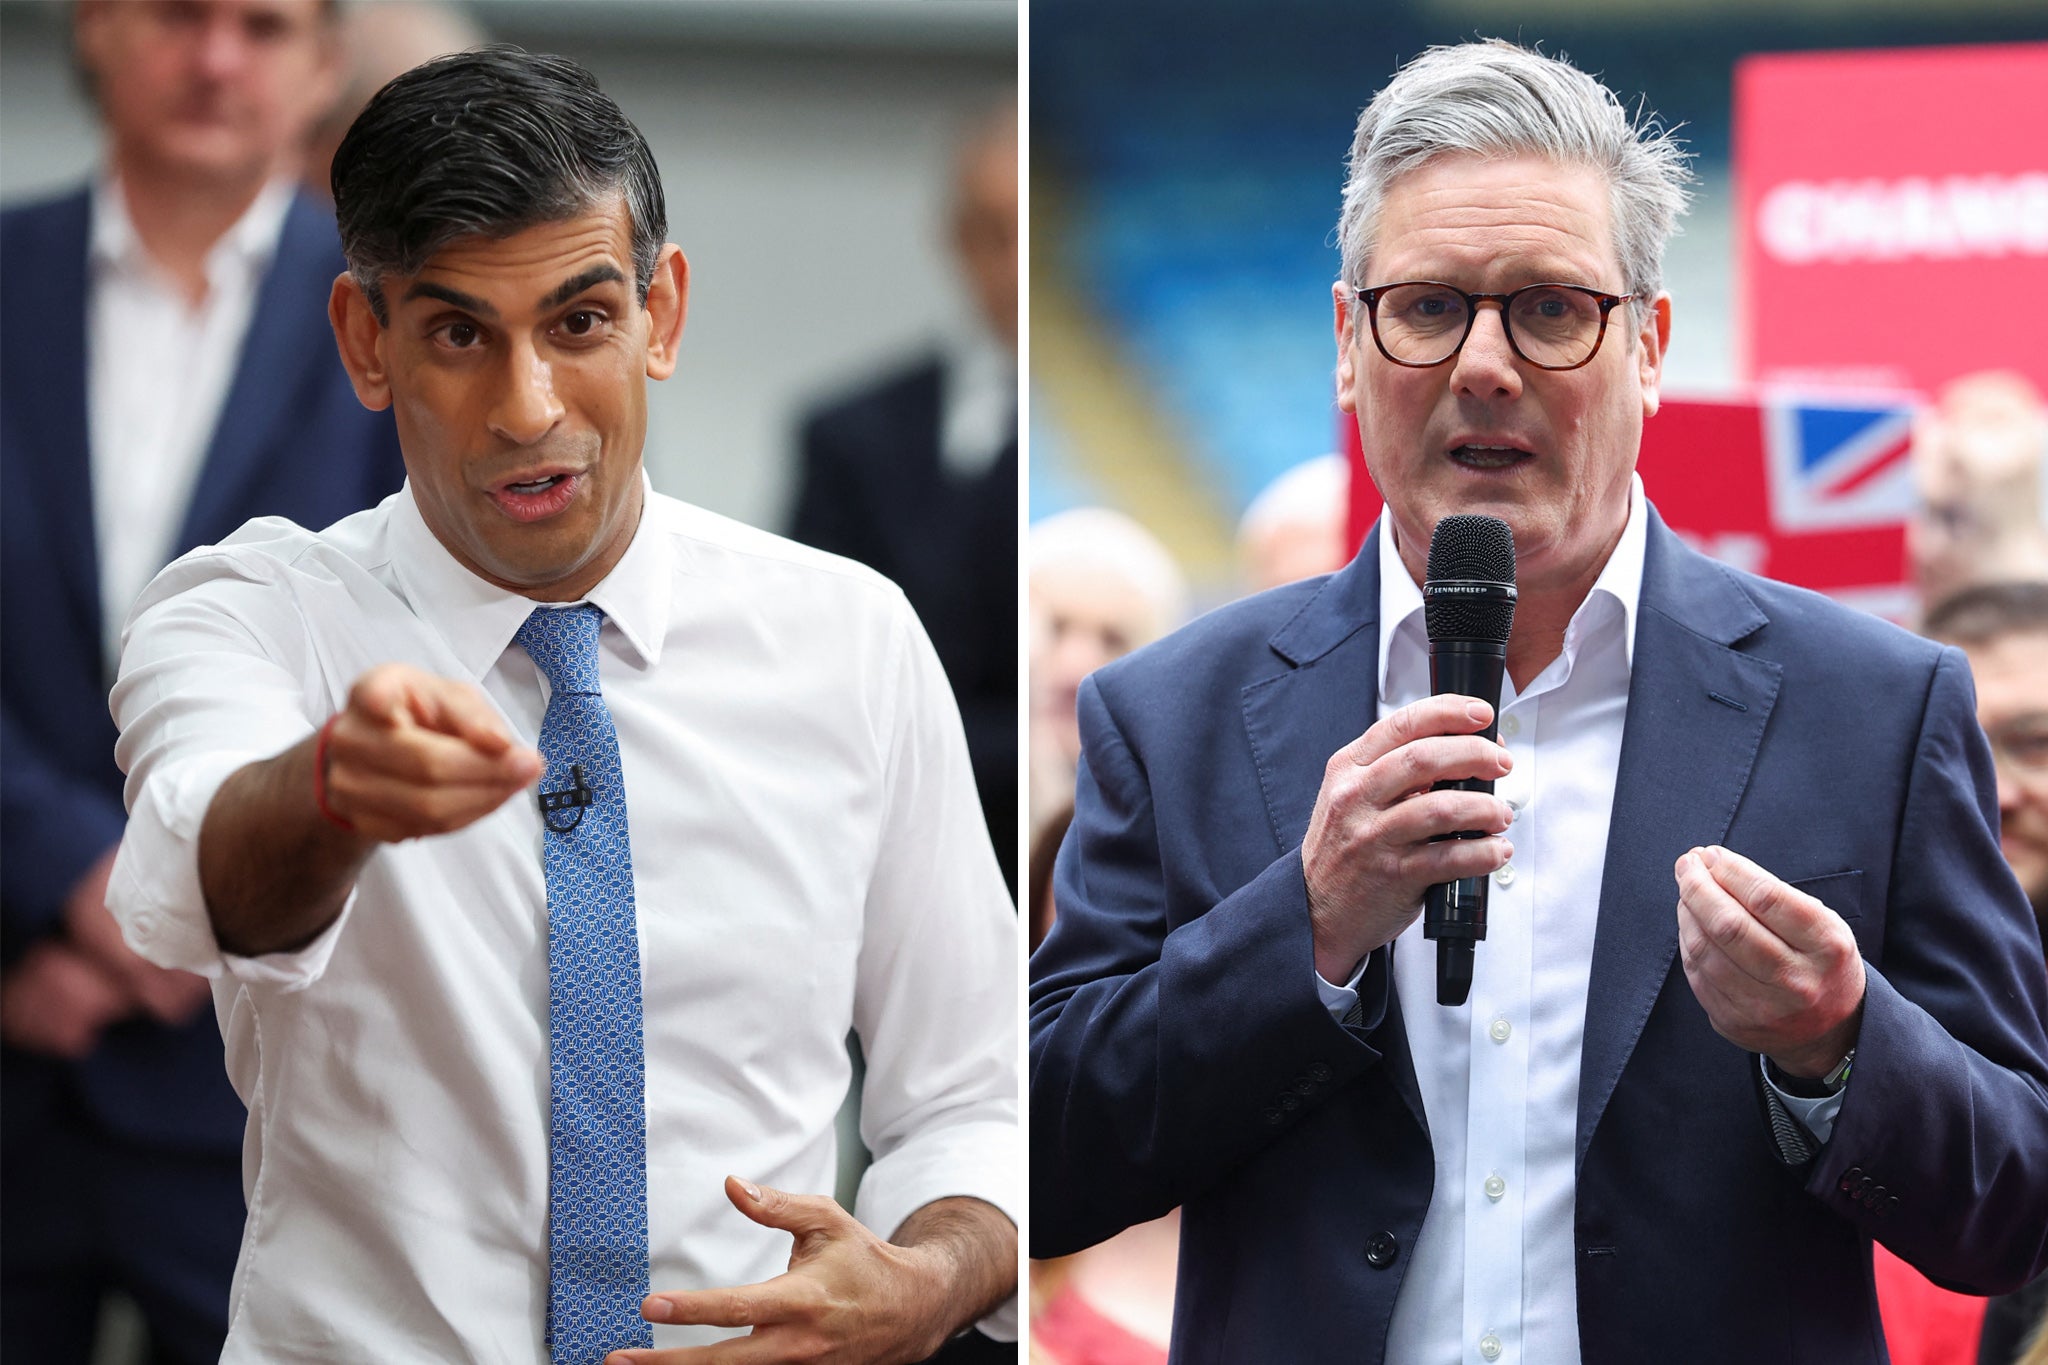 Both party leaders have been out and about at campaign events